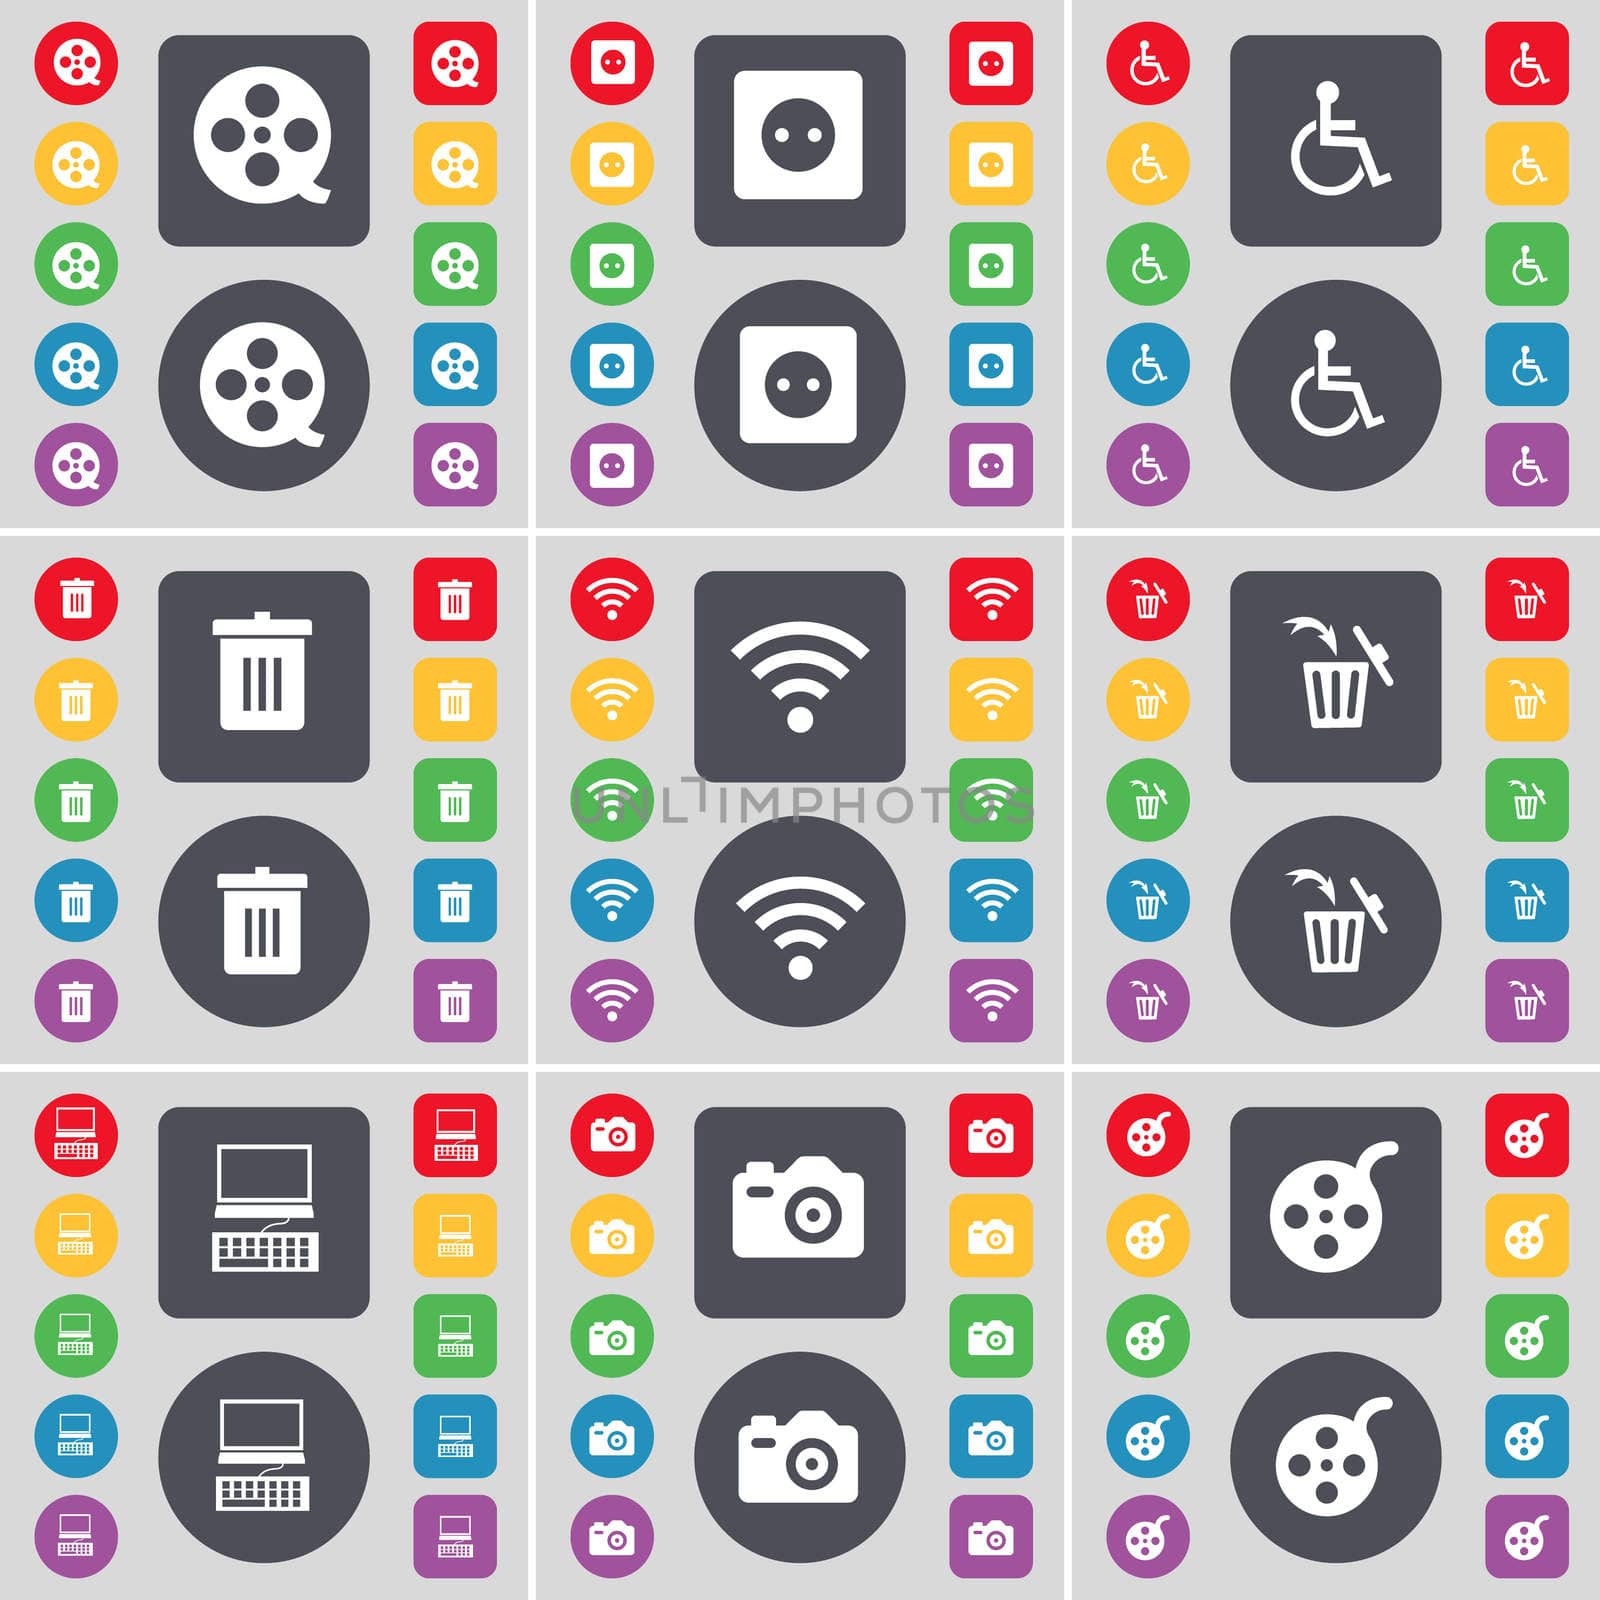 Videotape, Socket, Disabled person, Trash can, Wi-Fi, Laptop, Camera icon symbol. A large set of flat, colored buttons for your design. illustration